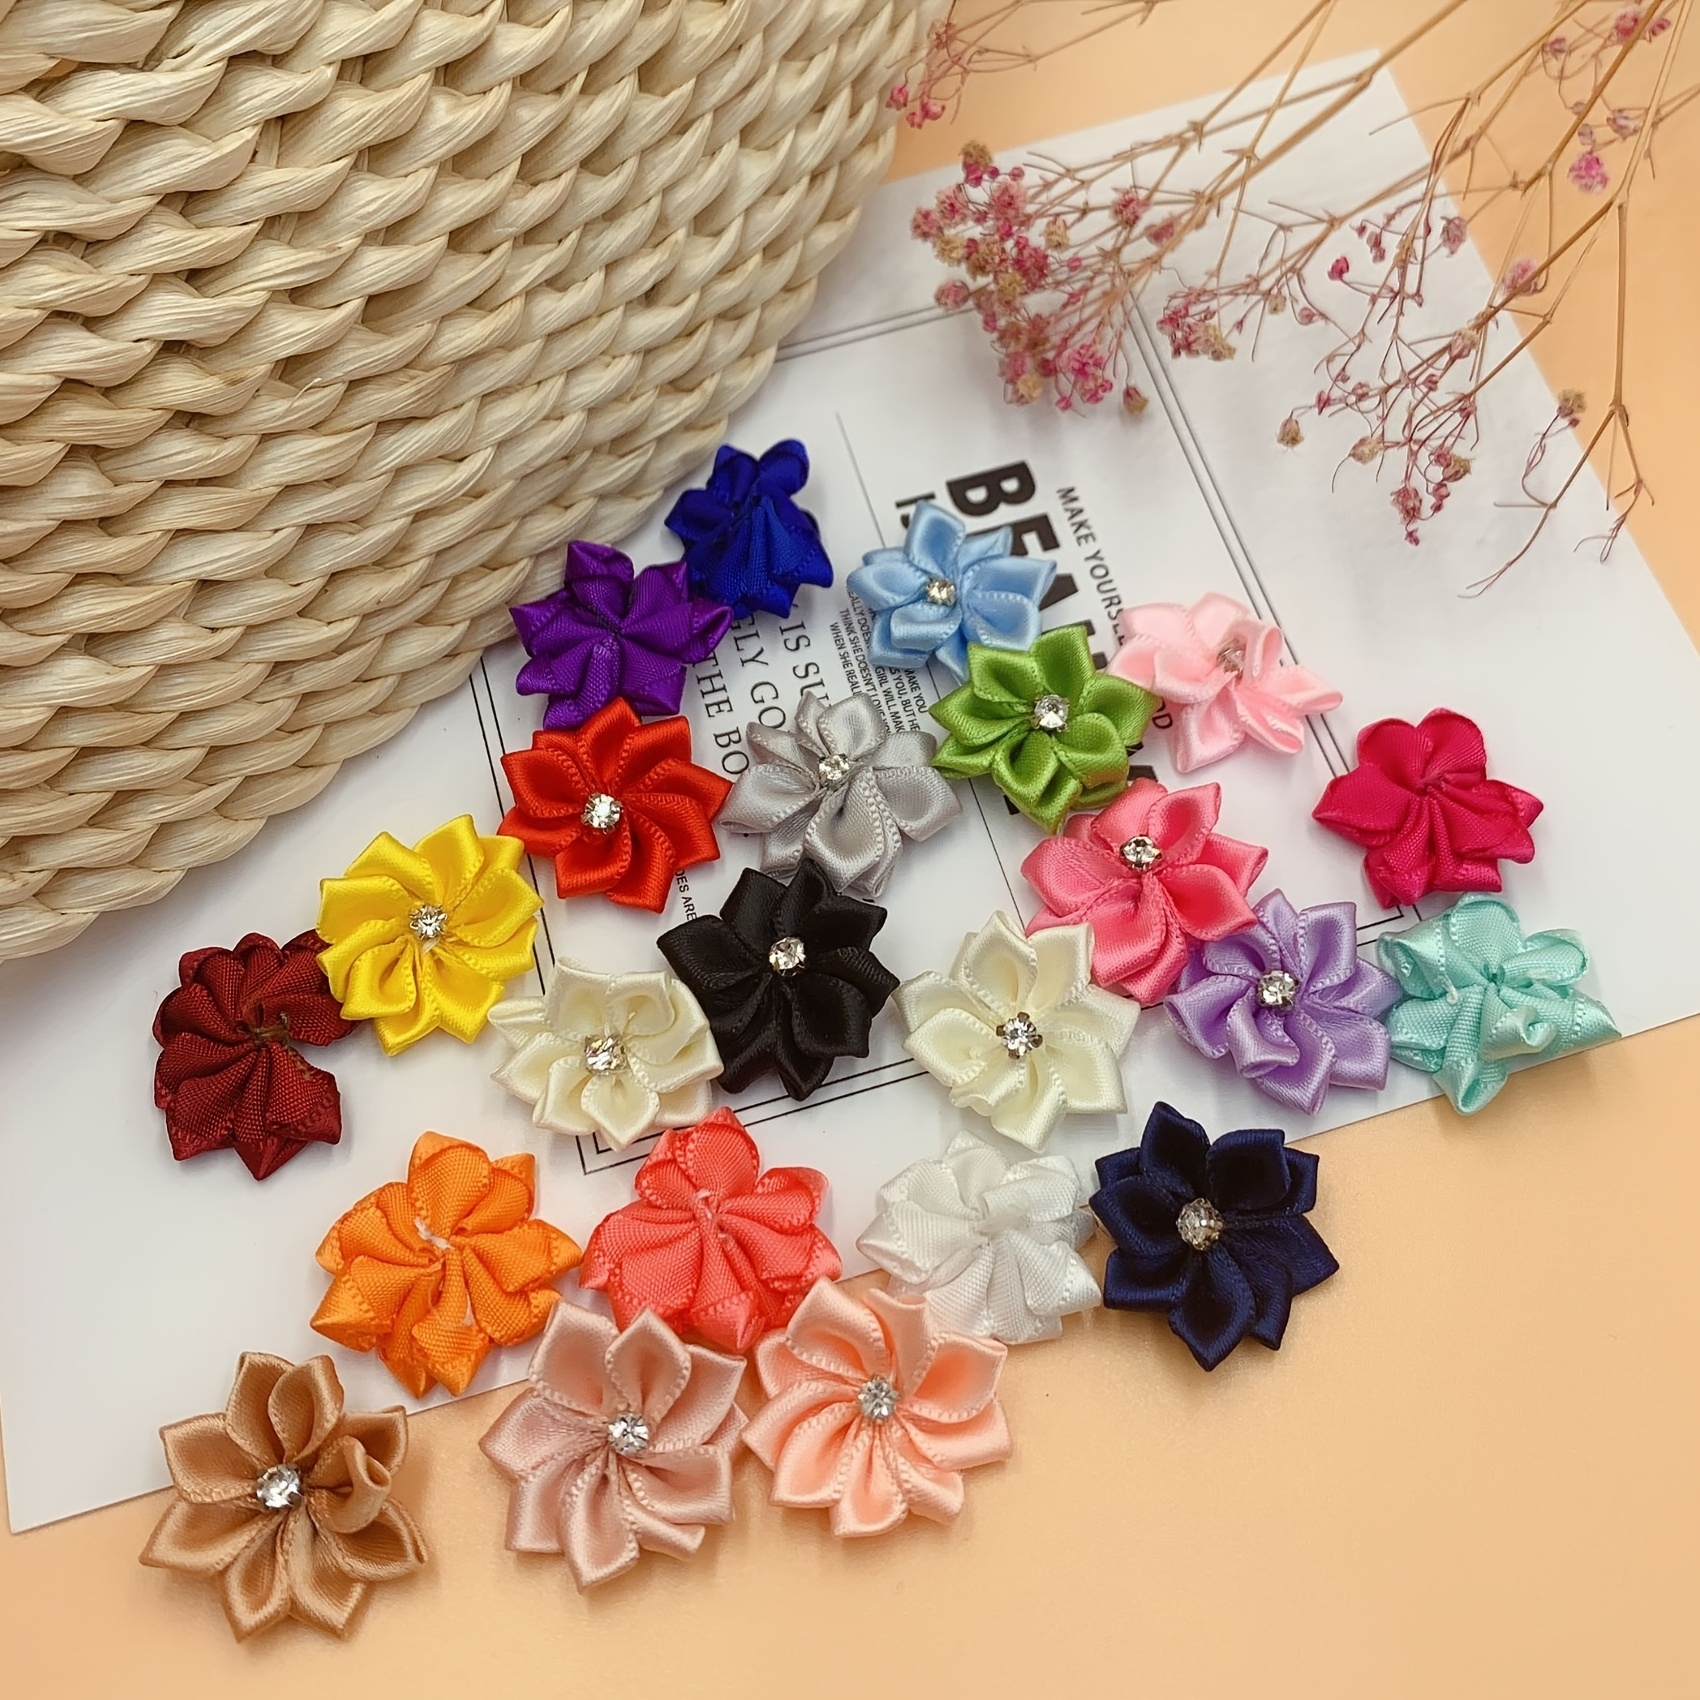 Create Felt Flowers for Home Decor or Fashion Accessories - The